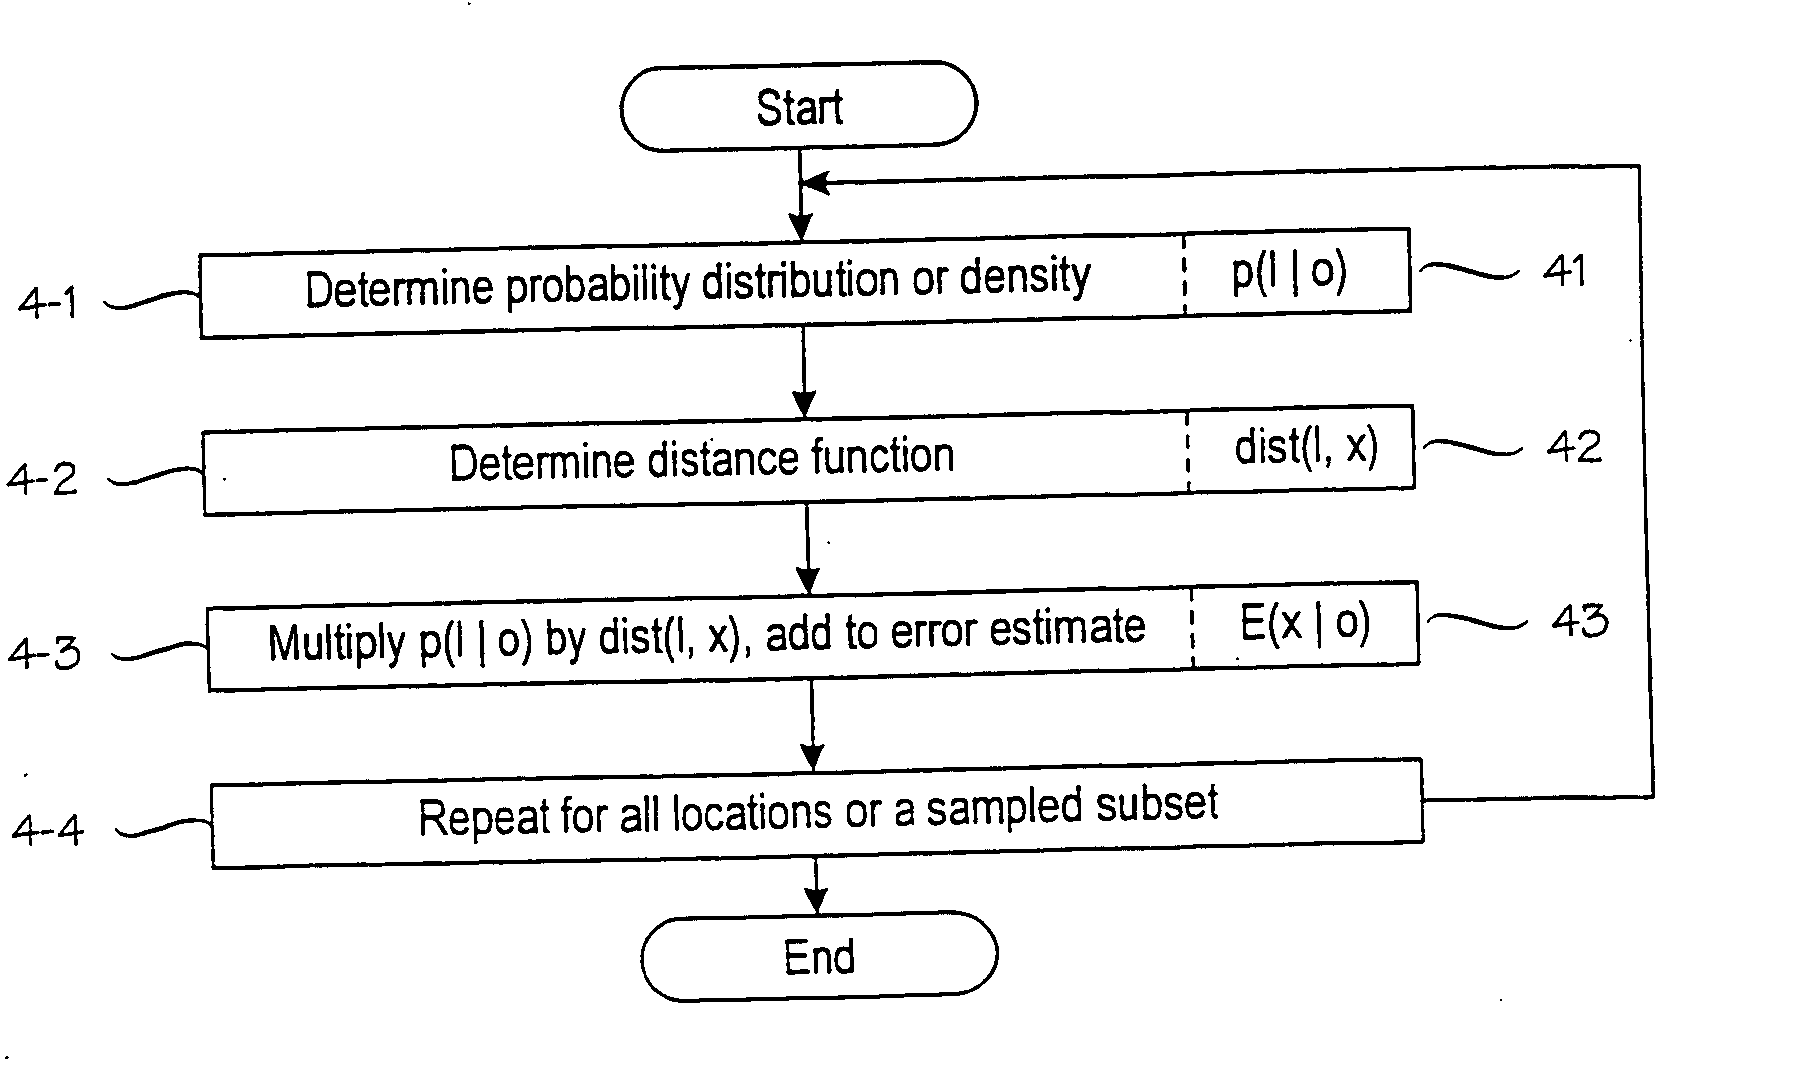 Error estimate concerning a target device's location operable to move in a wireless environment